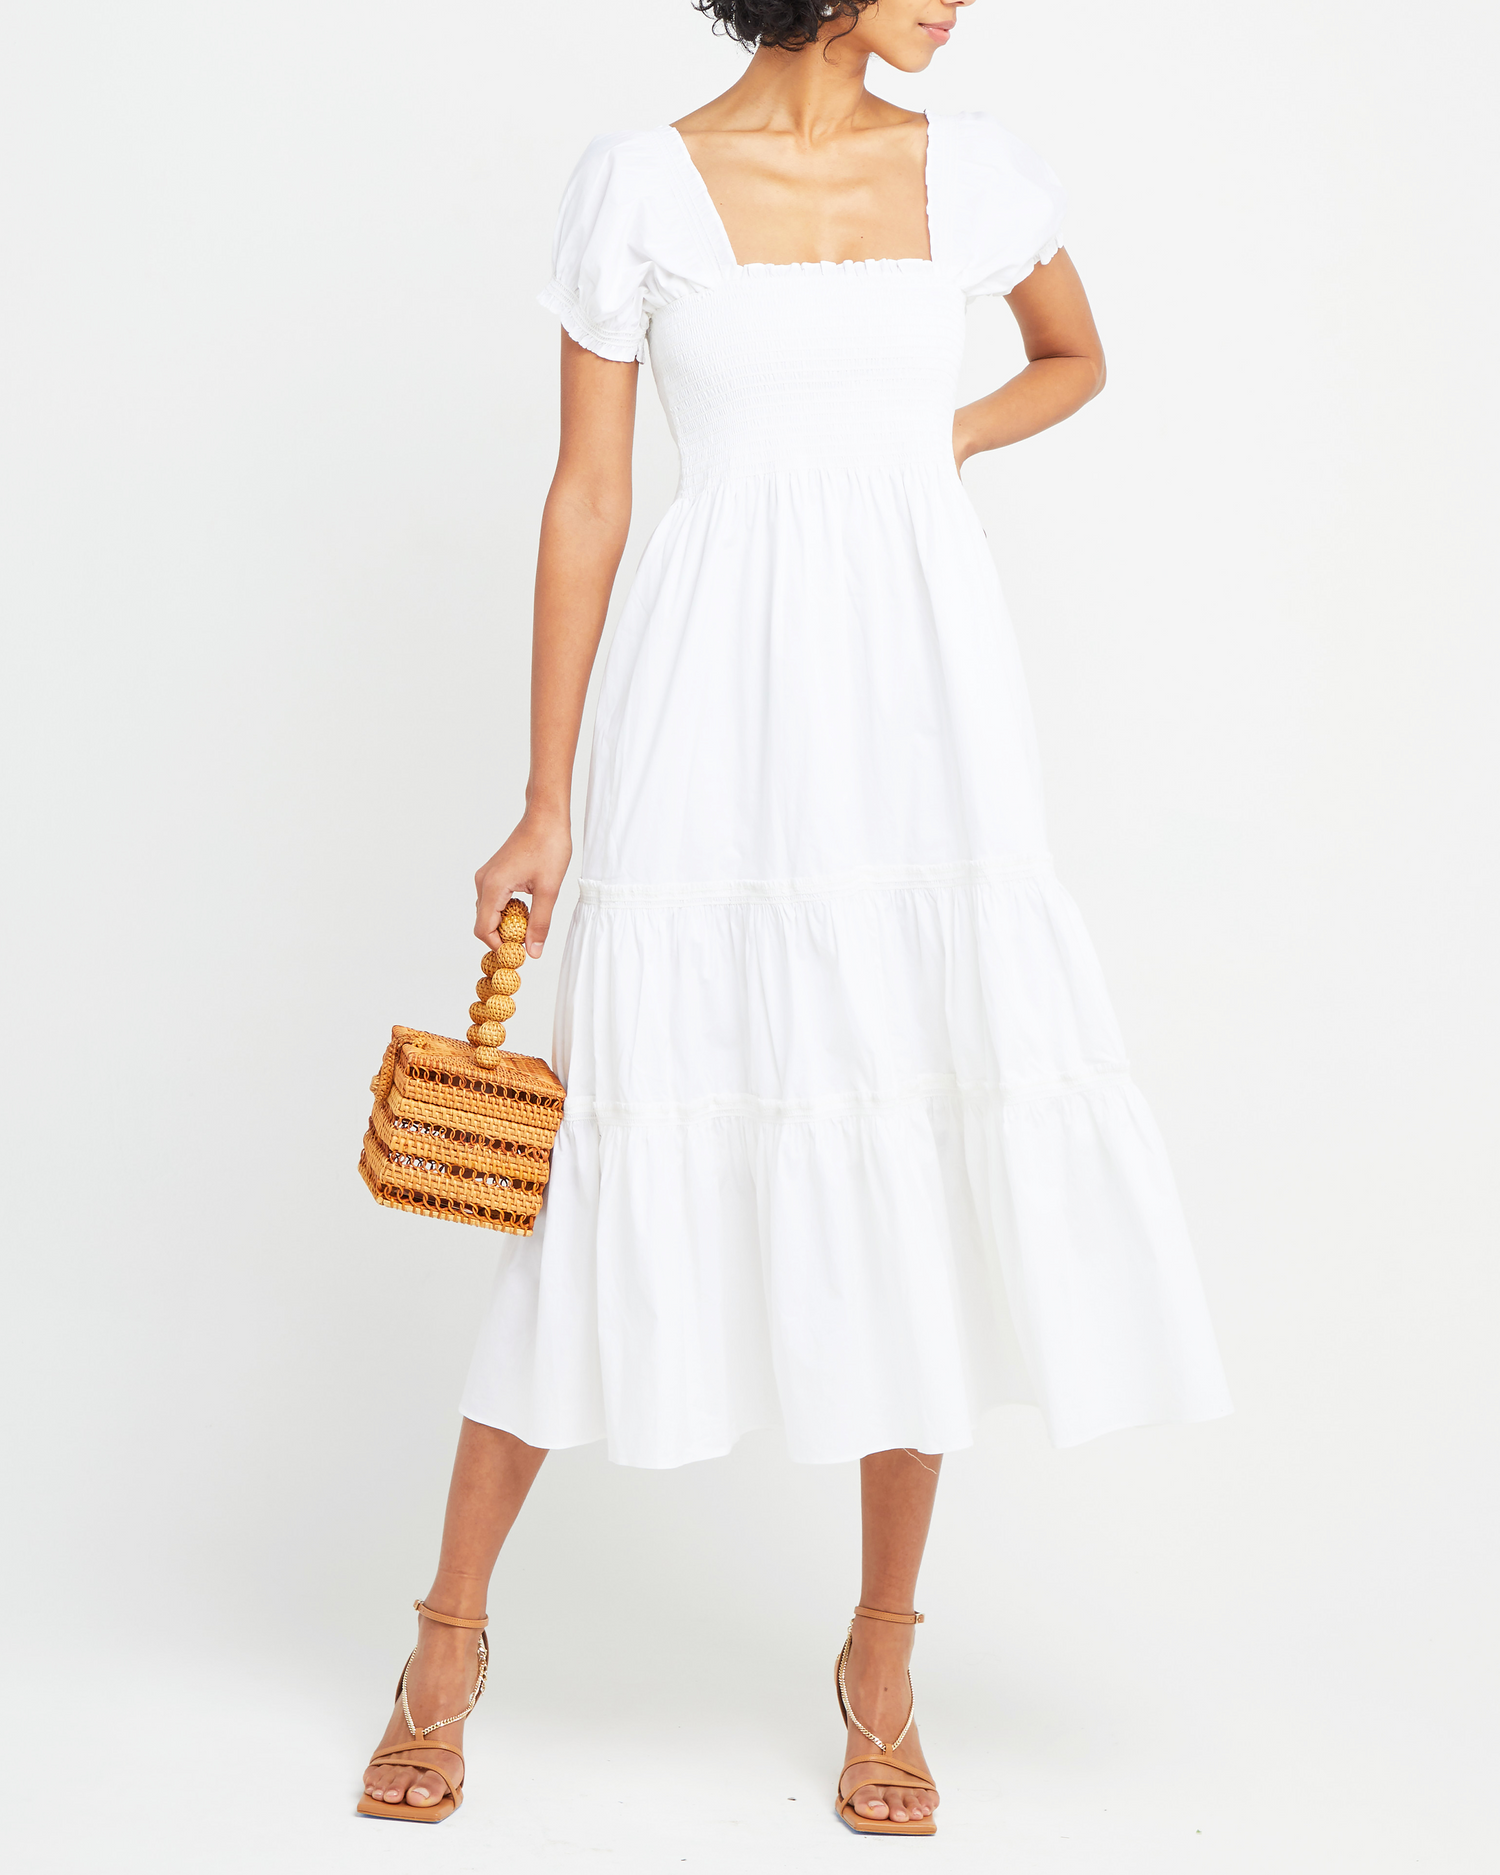 Fifth image of Square Neck Smocked Maxi Dress, a white maxi dress, smocked, puff sleeves, short sleeves